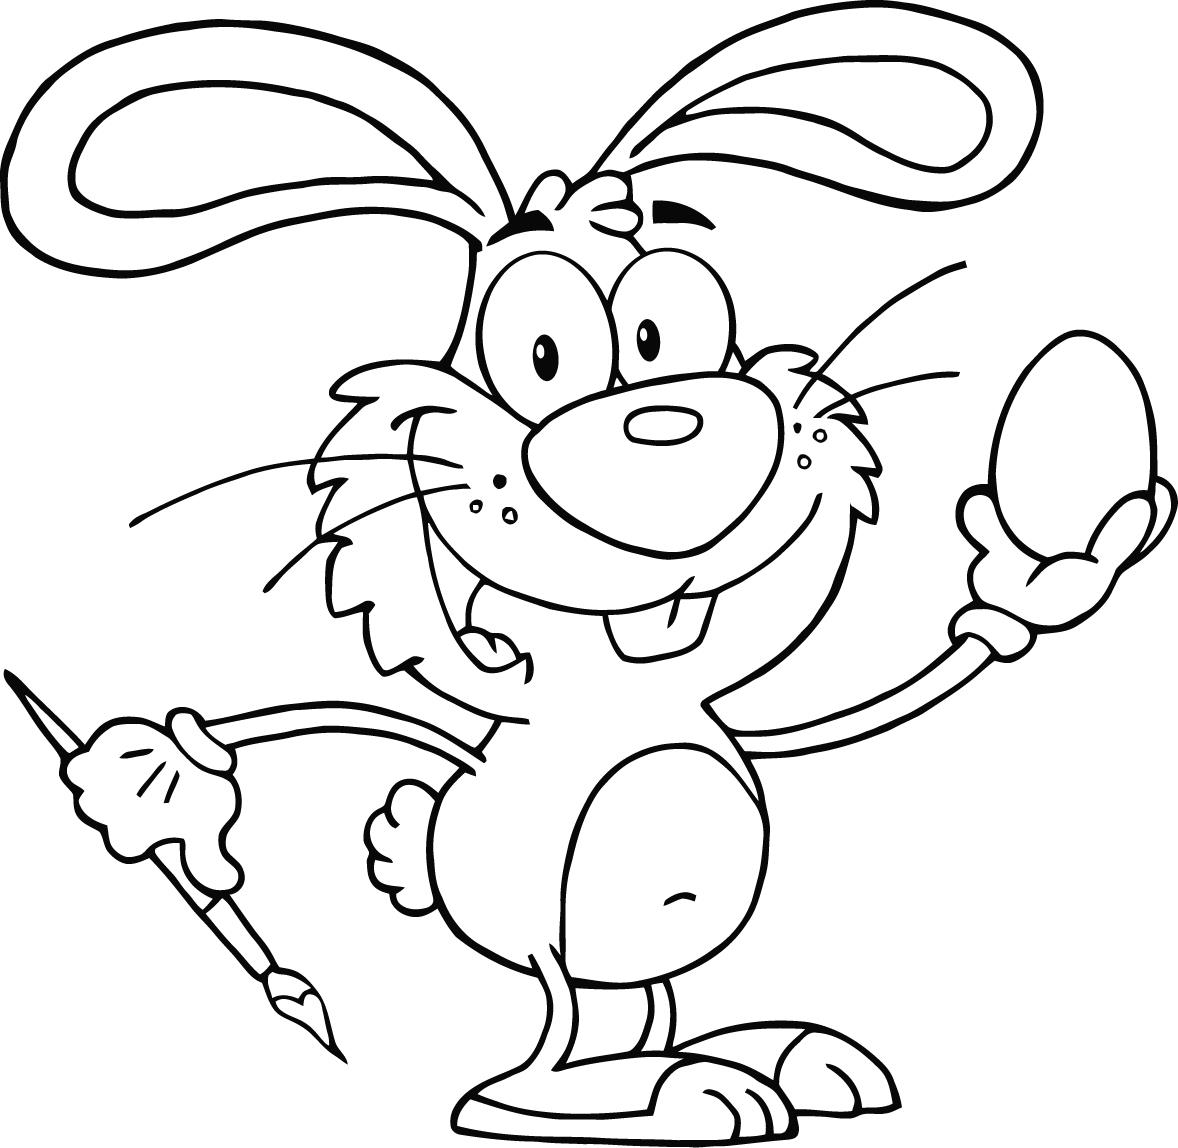 Bunny Coloring Pages Best Coloring Pages For Kids Coloring Wallpapers Download Free Images Wallpaper [coloring436.blogspot.com]